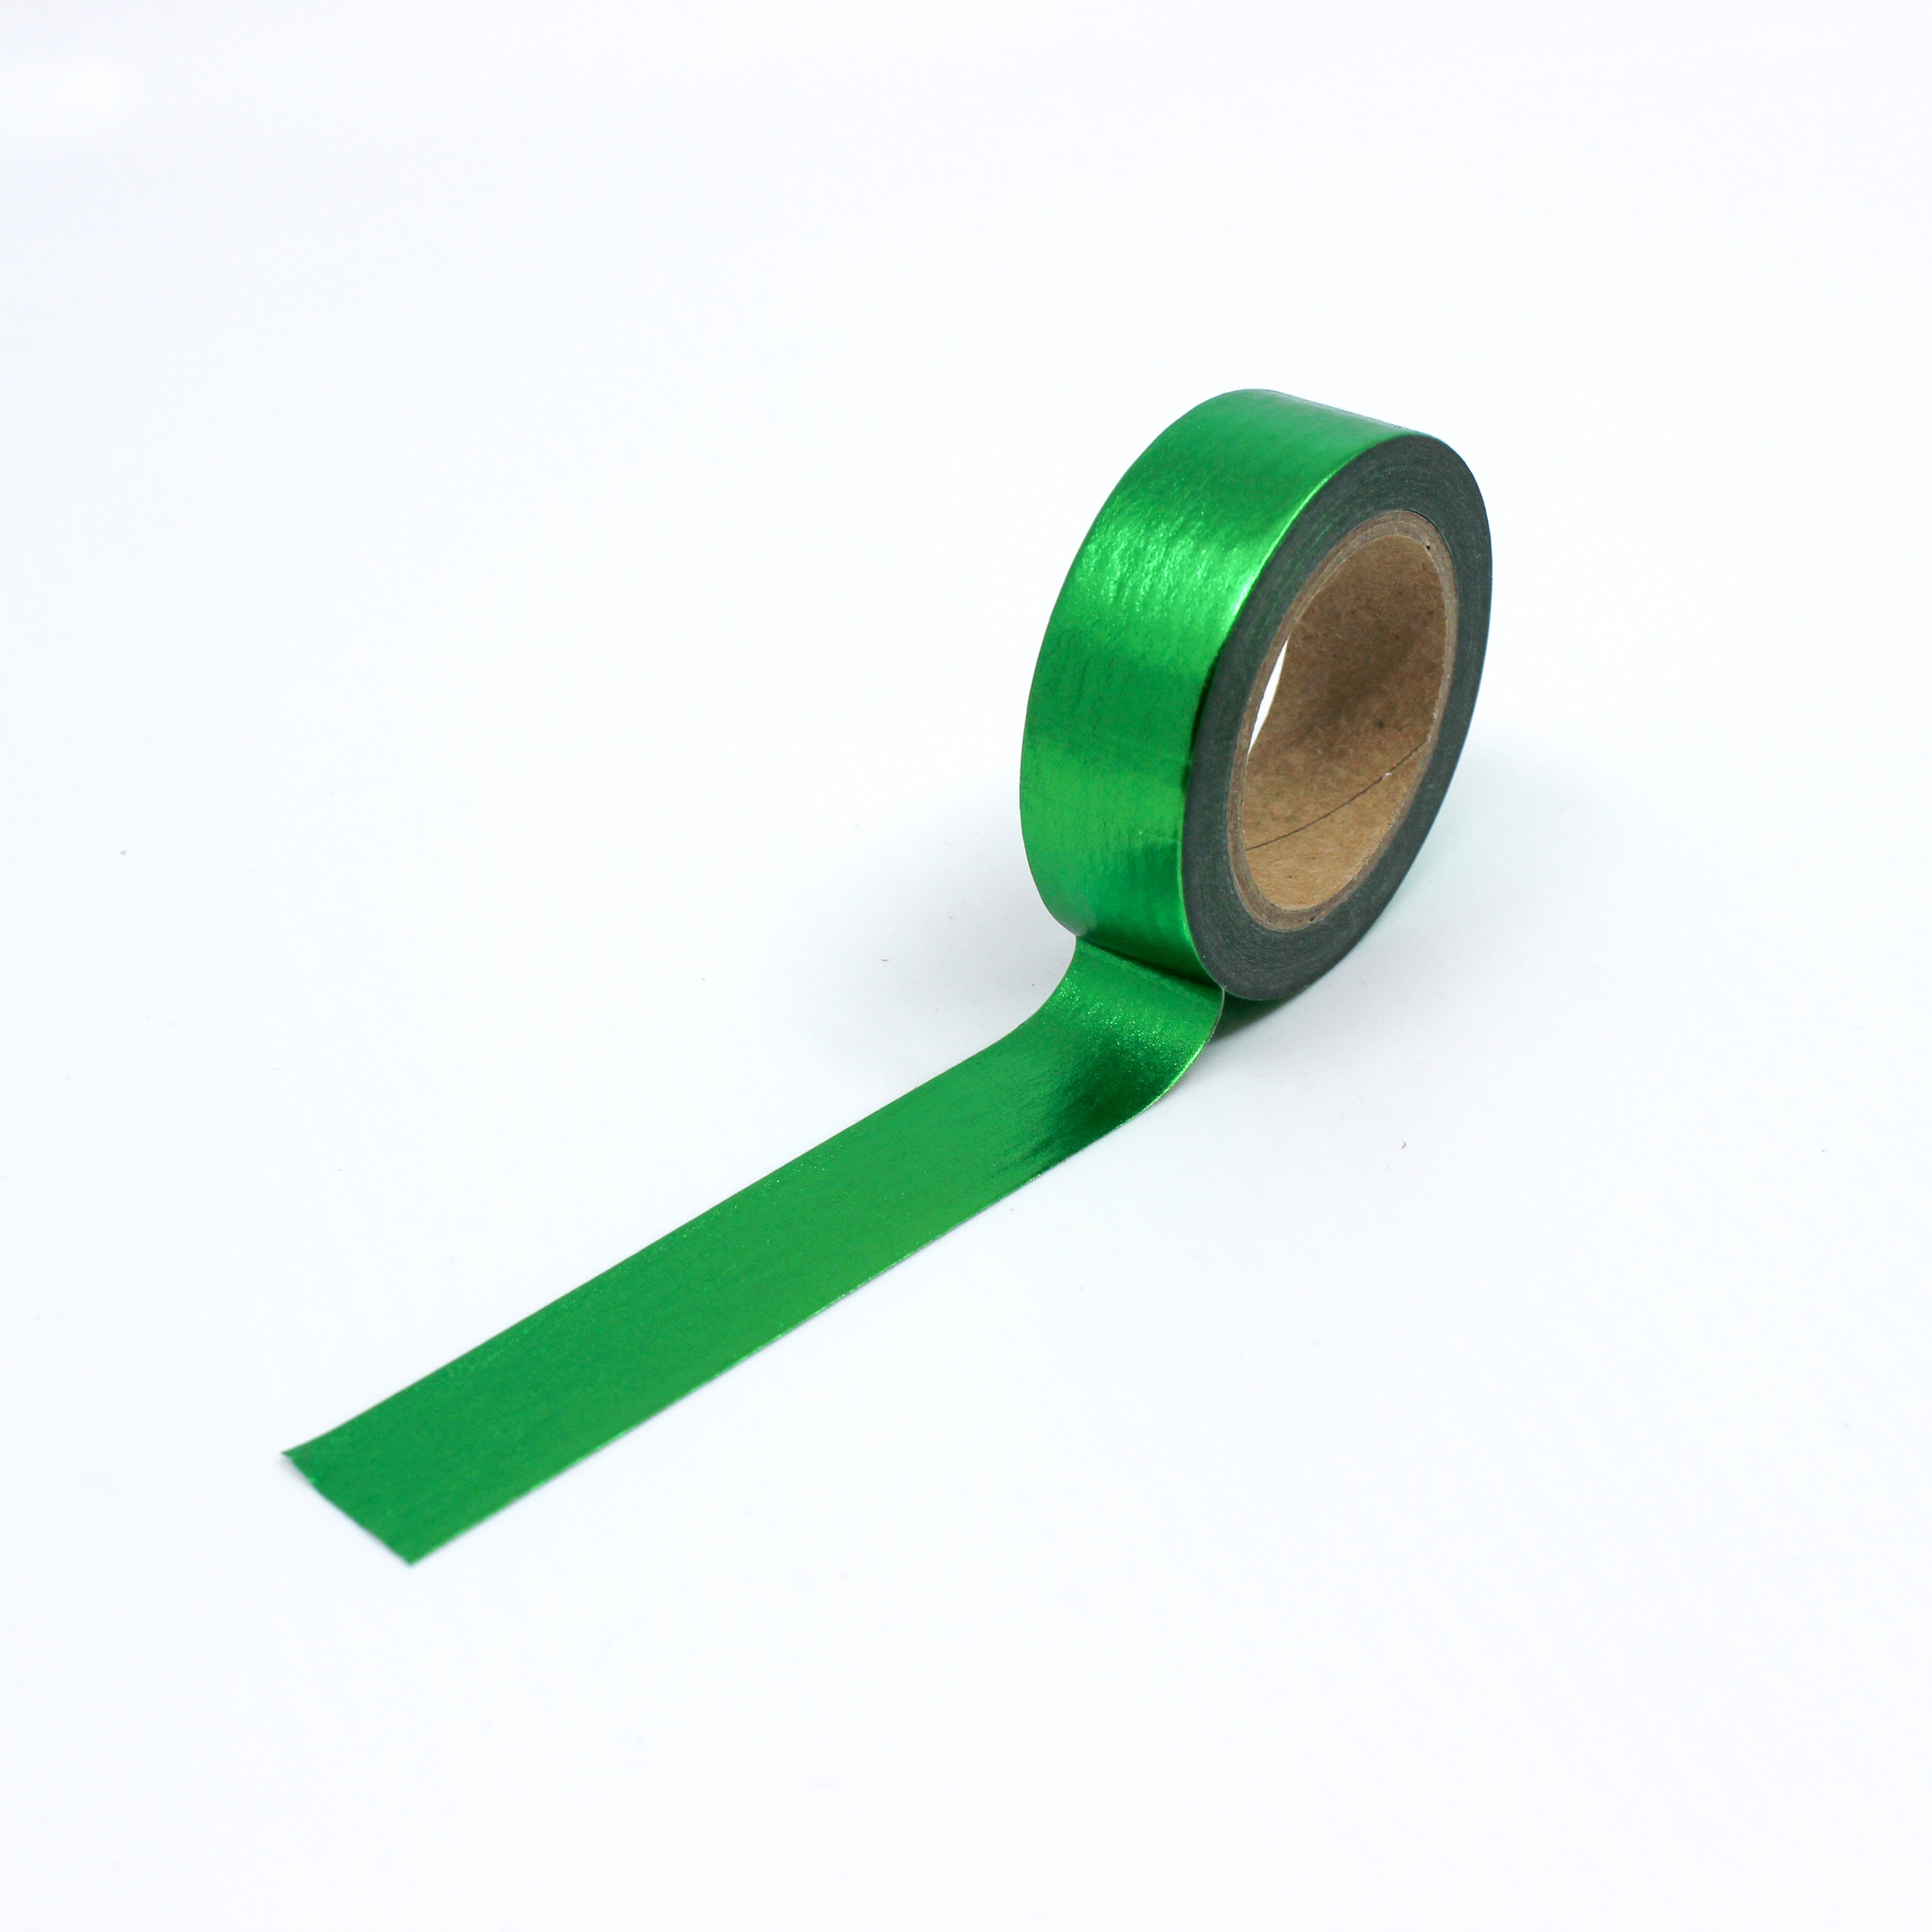 Deep Green Shiny Foil Washi, Planner Tapes